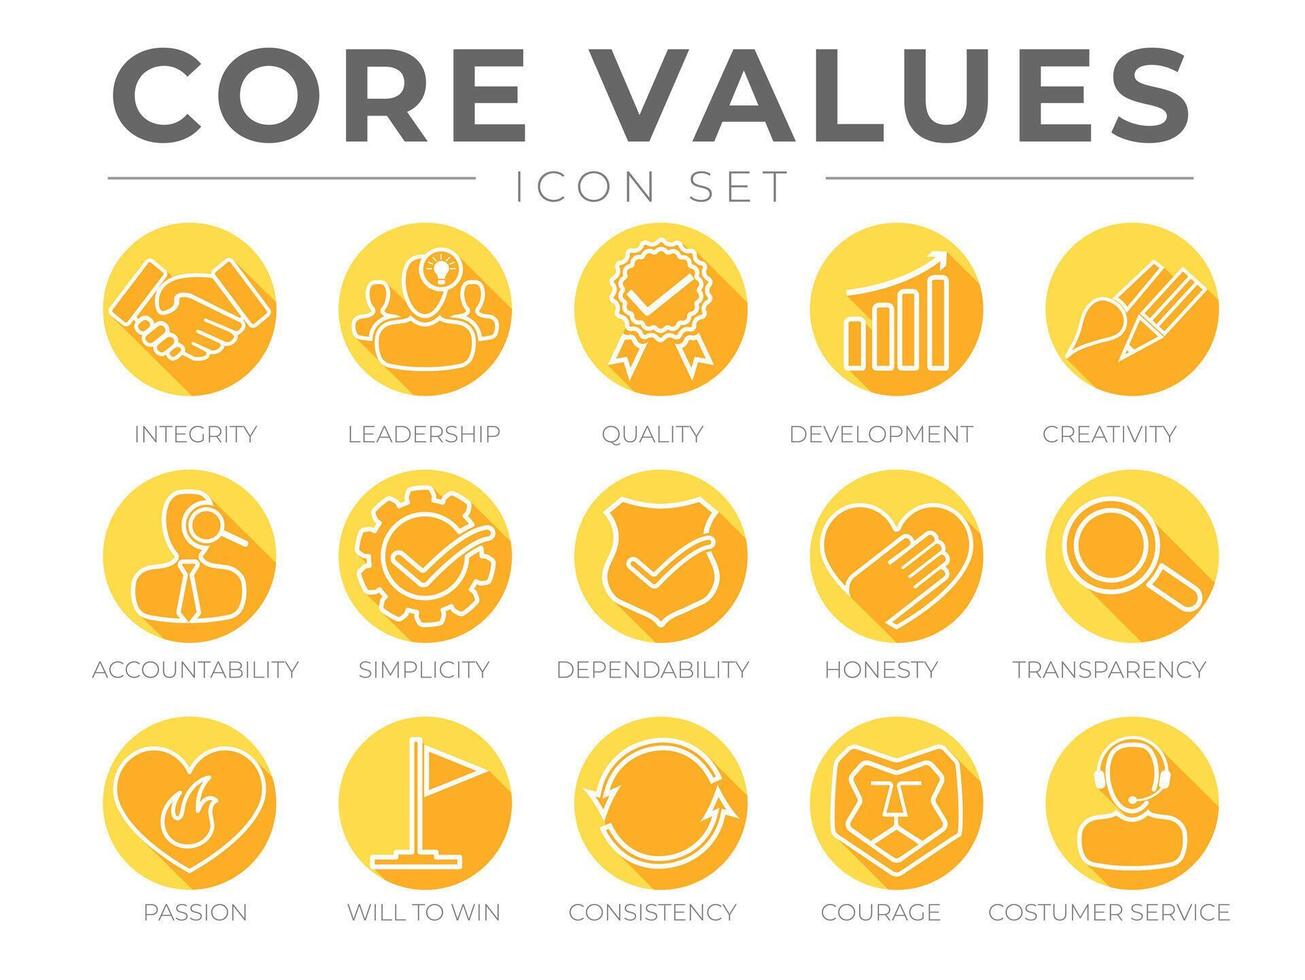 Company Core Values Round Flat Icon Set. Integrity, Leadership, Quality and Development, Creativity, Accountability, Simplicity, Dependability, Transparency, Courage and Customer Service Icons. vector